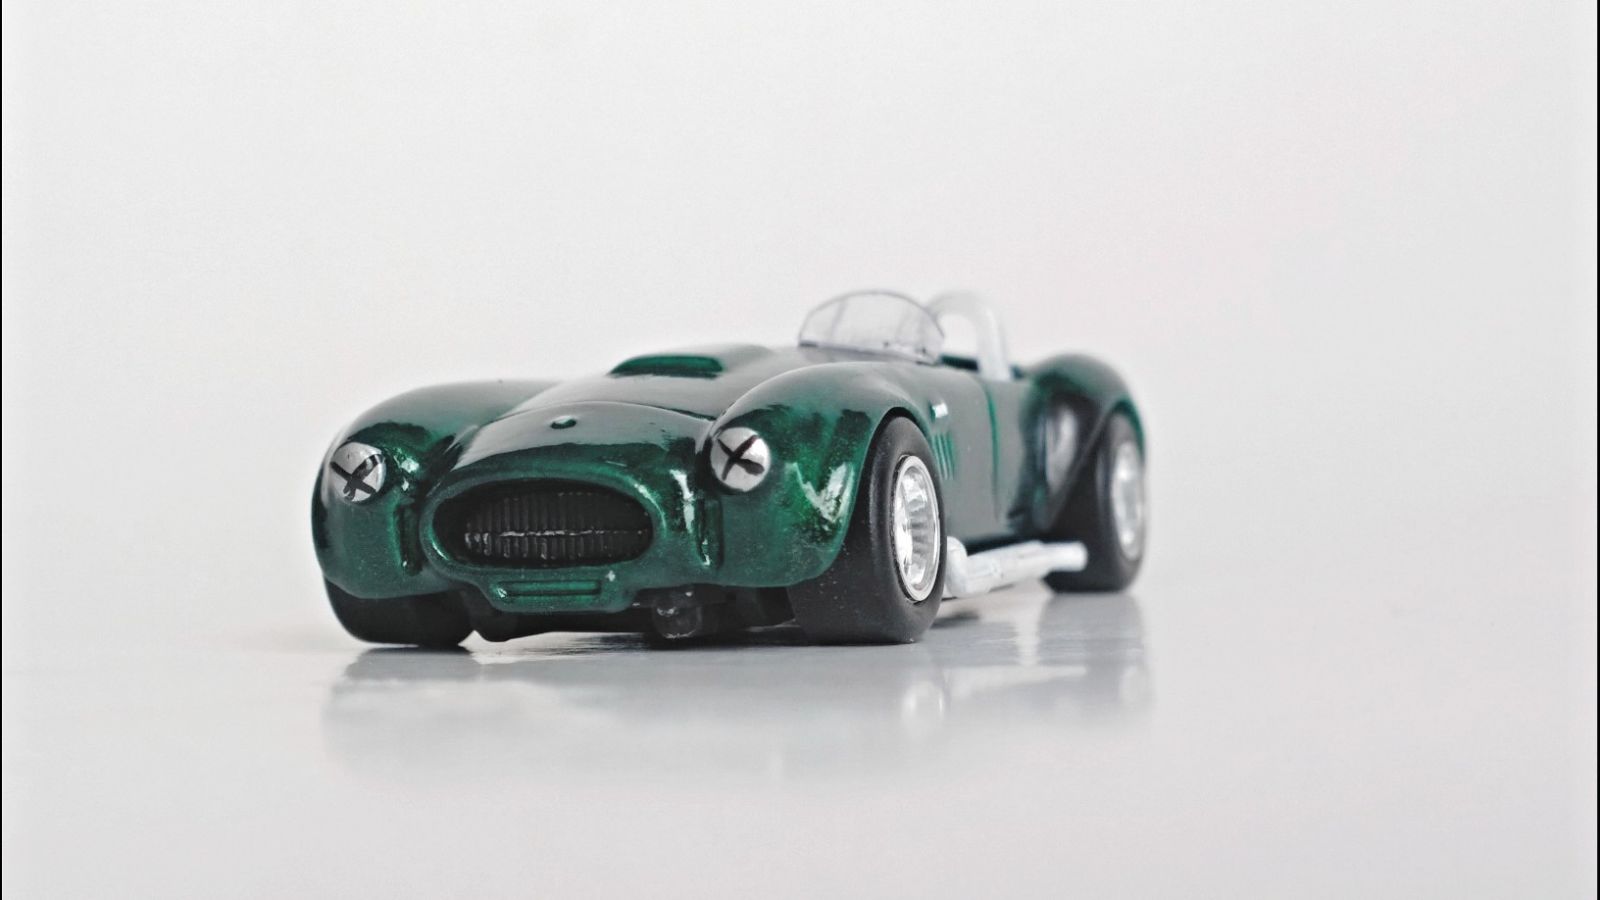 Illustration for article titled CUSTOM AC Cobra completed!!!